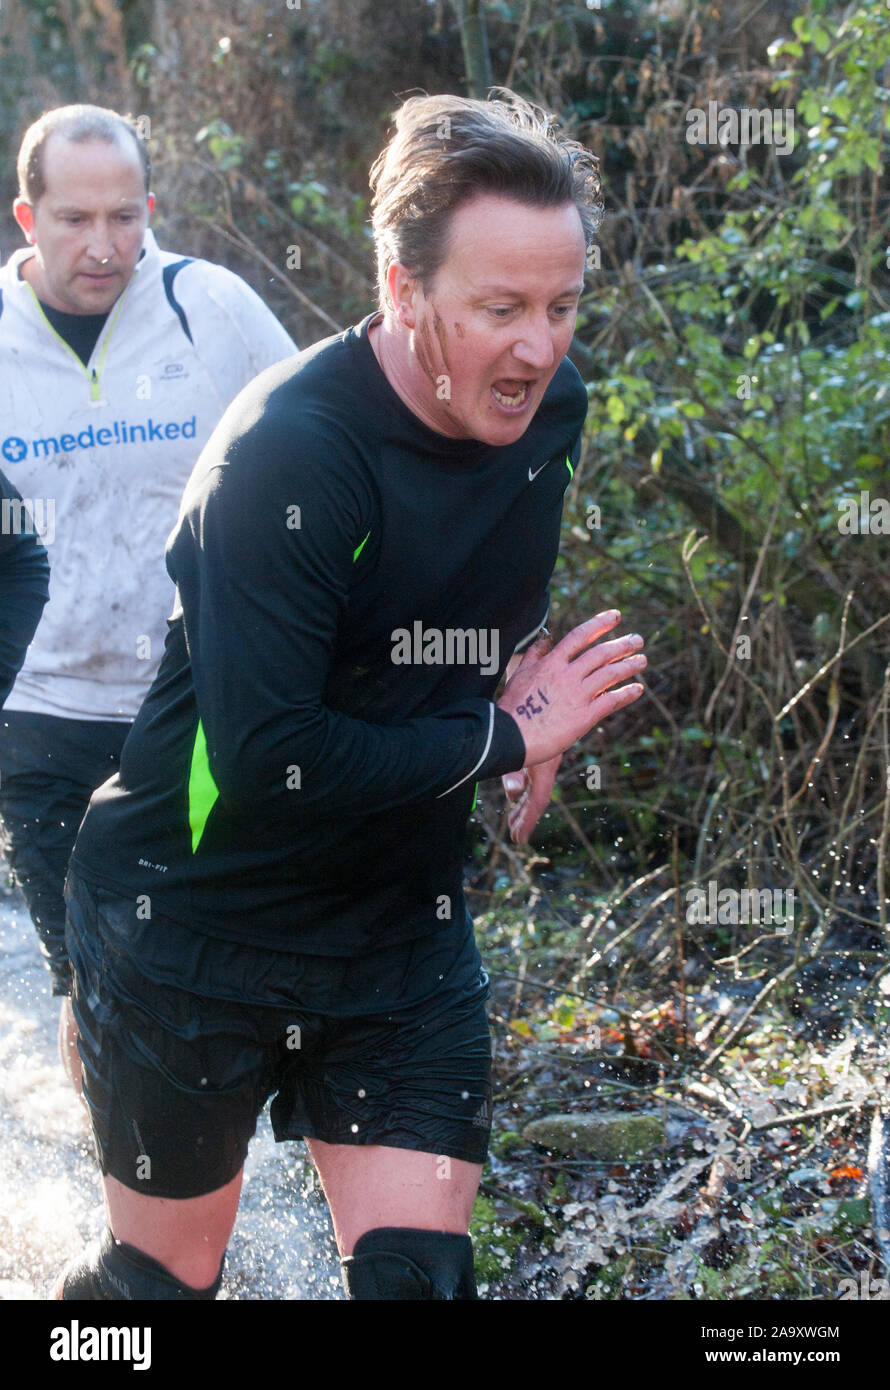 The Prime Minister David Cameron competing in the Great Brook Run in his Witney constituency village of Chadlington in December 2014. The Great Brook Run is an annual mile-long cross country run following  a path along the village stream called Coldron Brook passing through a 3-foot tunnel under a bridge. Stock Photo